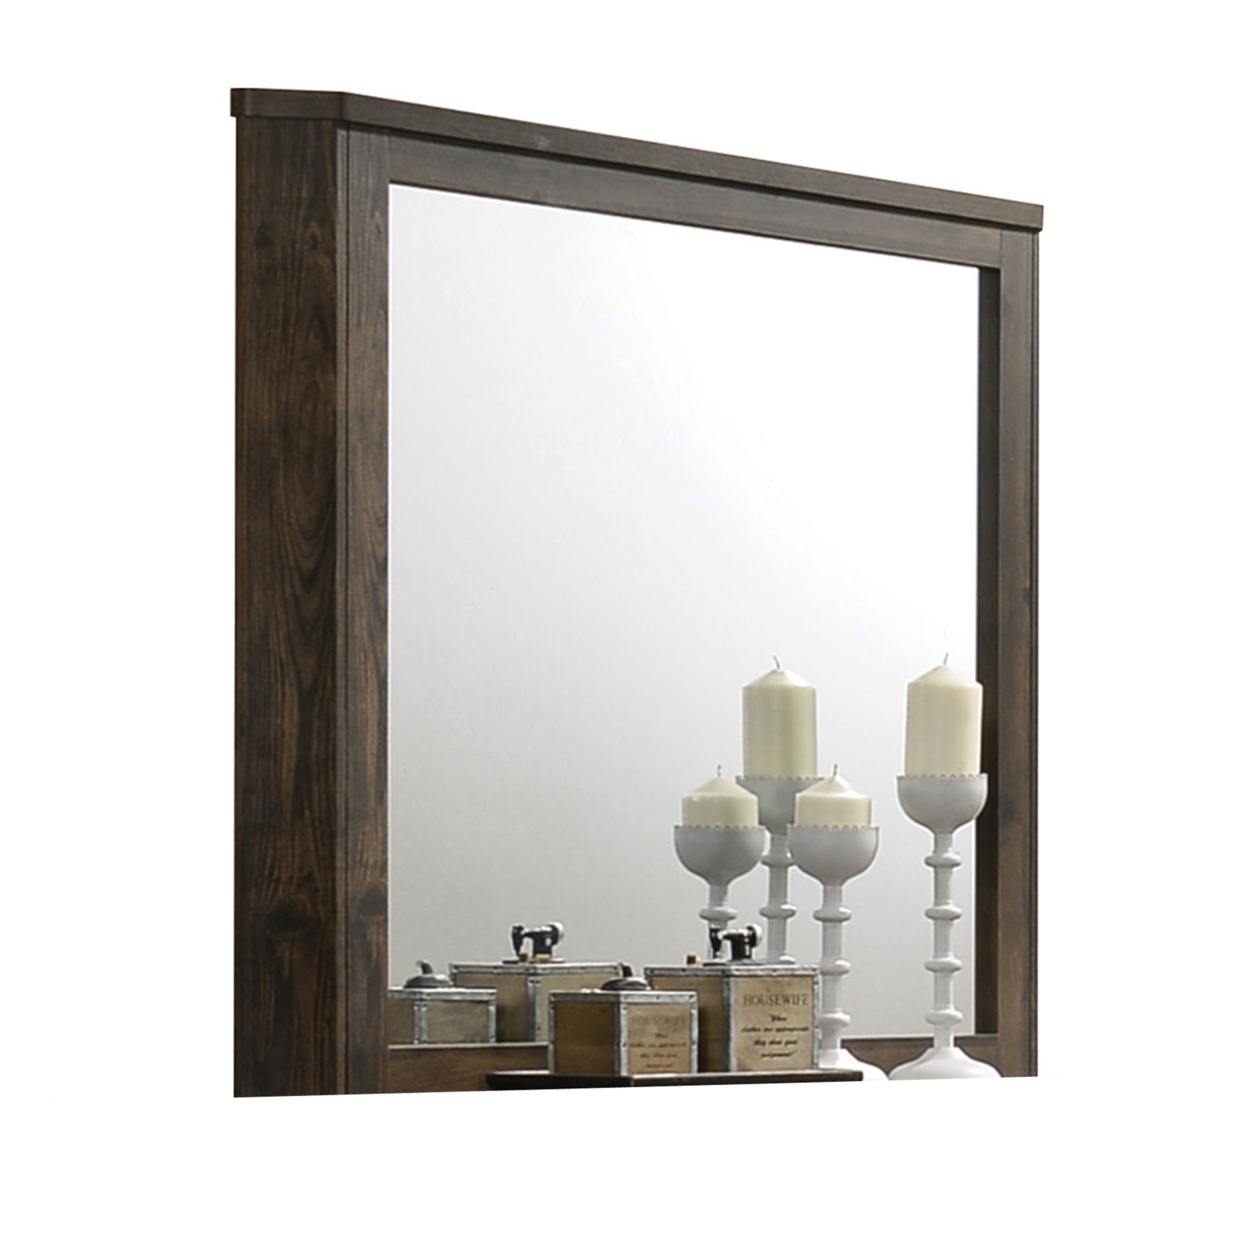 Transitional Style Wooden Decorative Mirror With Grooved Panels, Brown- Saltoro Sherpi